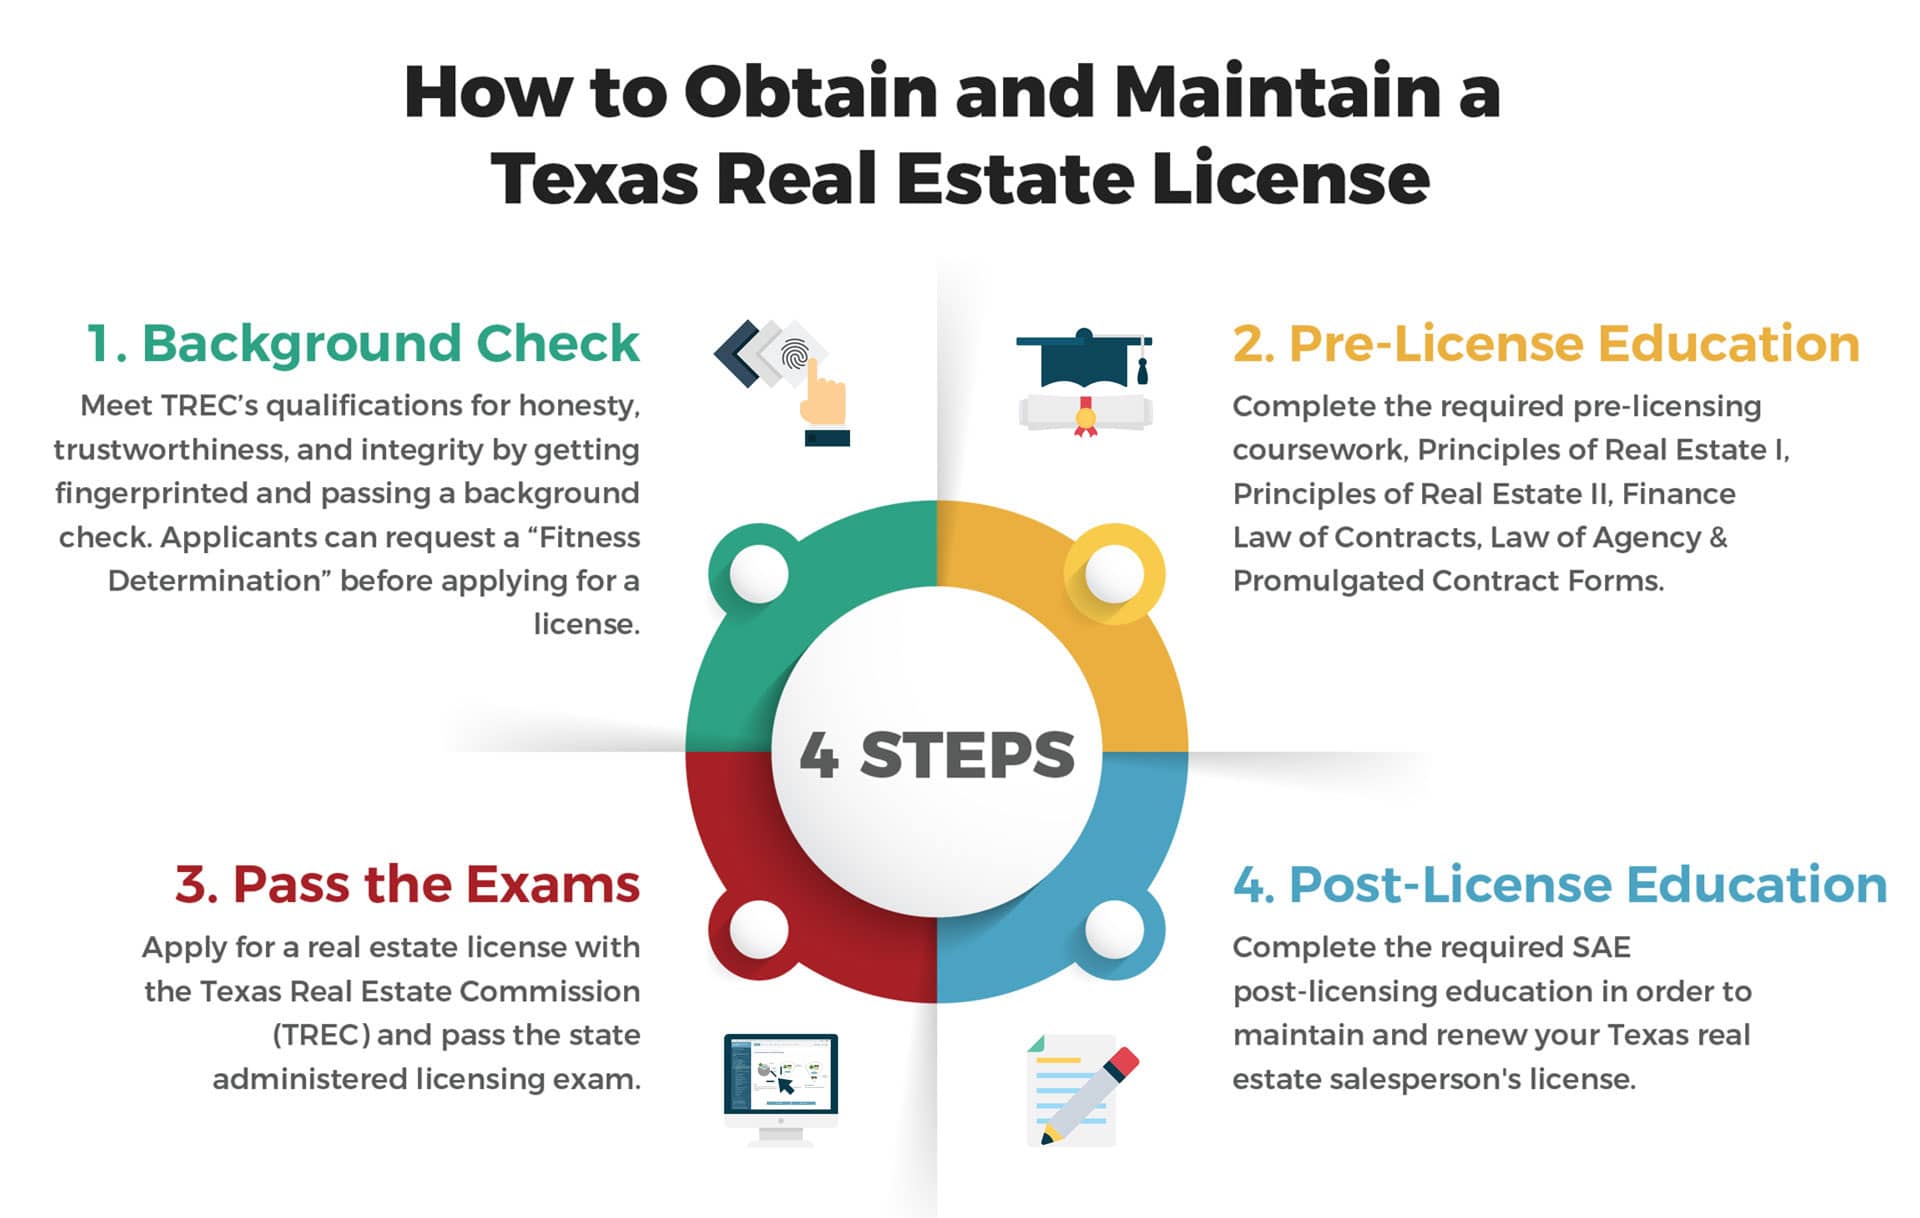 How to get into real estate in texas